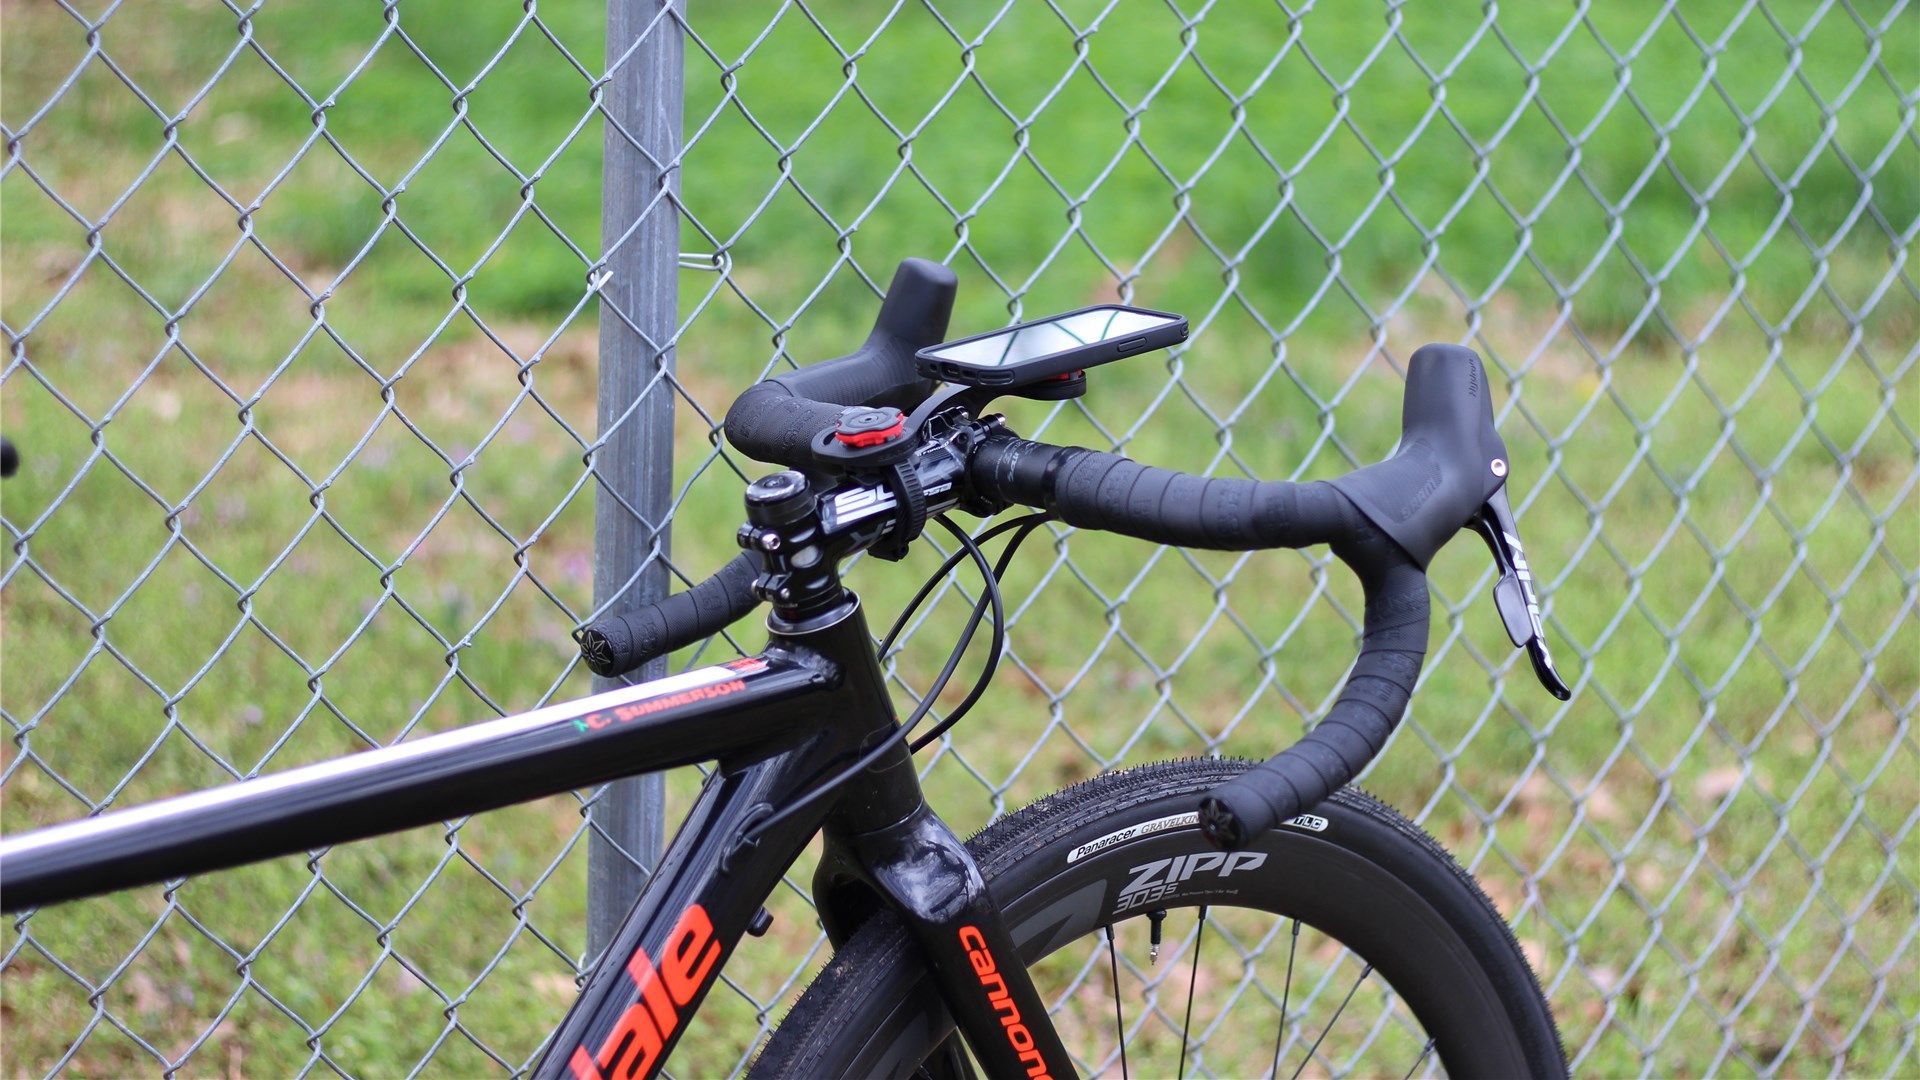 A Cannondale CAADX gravel bike with Spigen's Gearlock stem and out-front mounts installed. An iPhone 12 Mini is on the out-front mount.